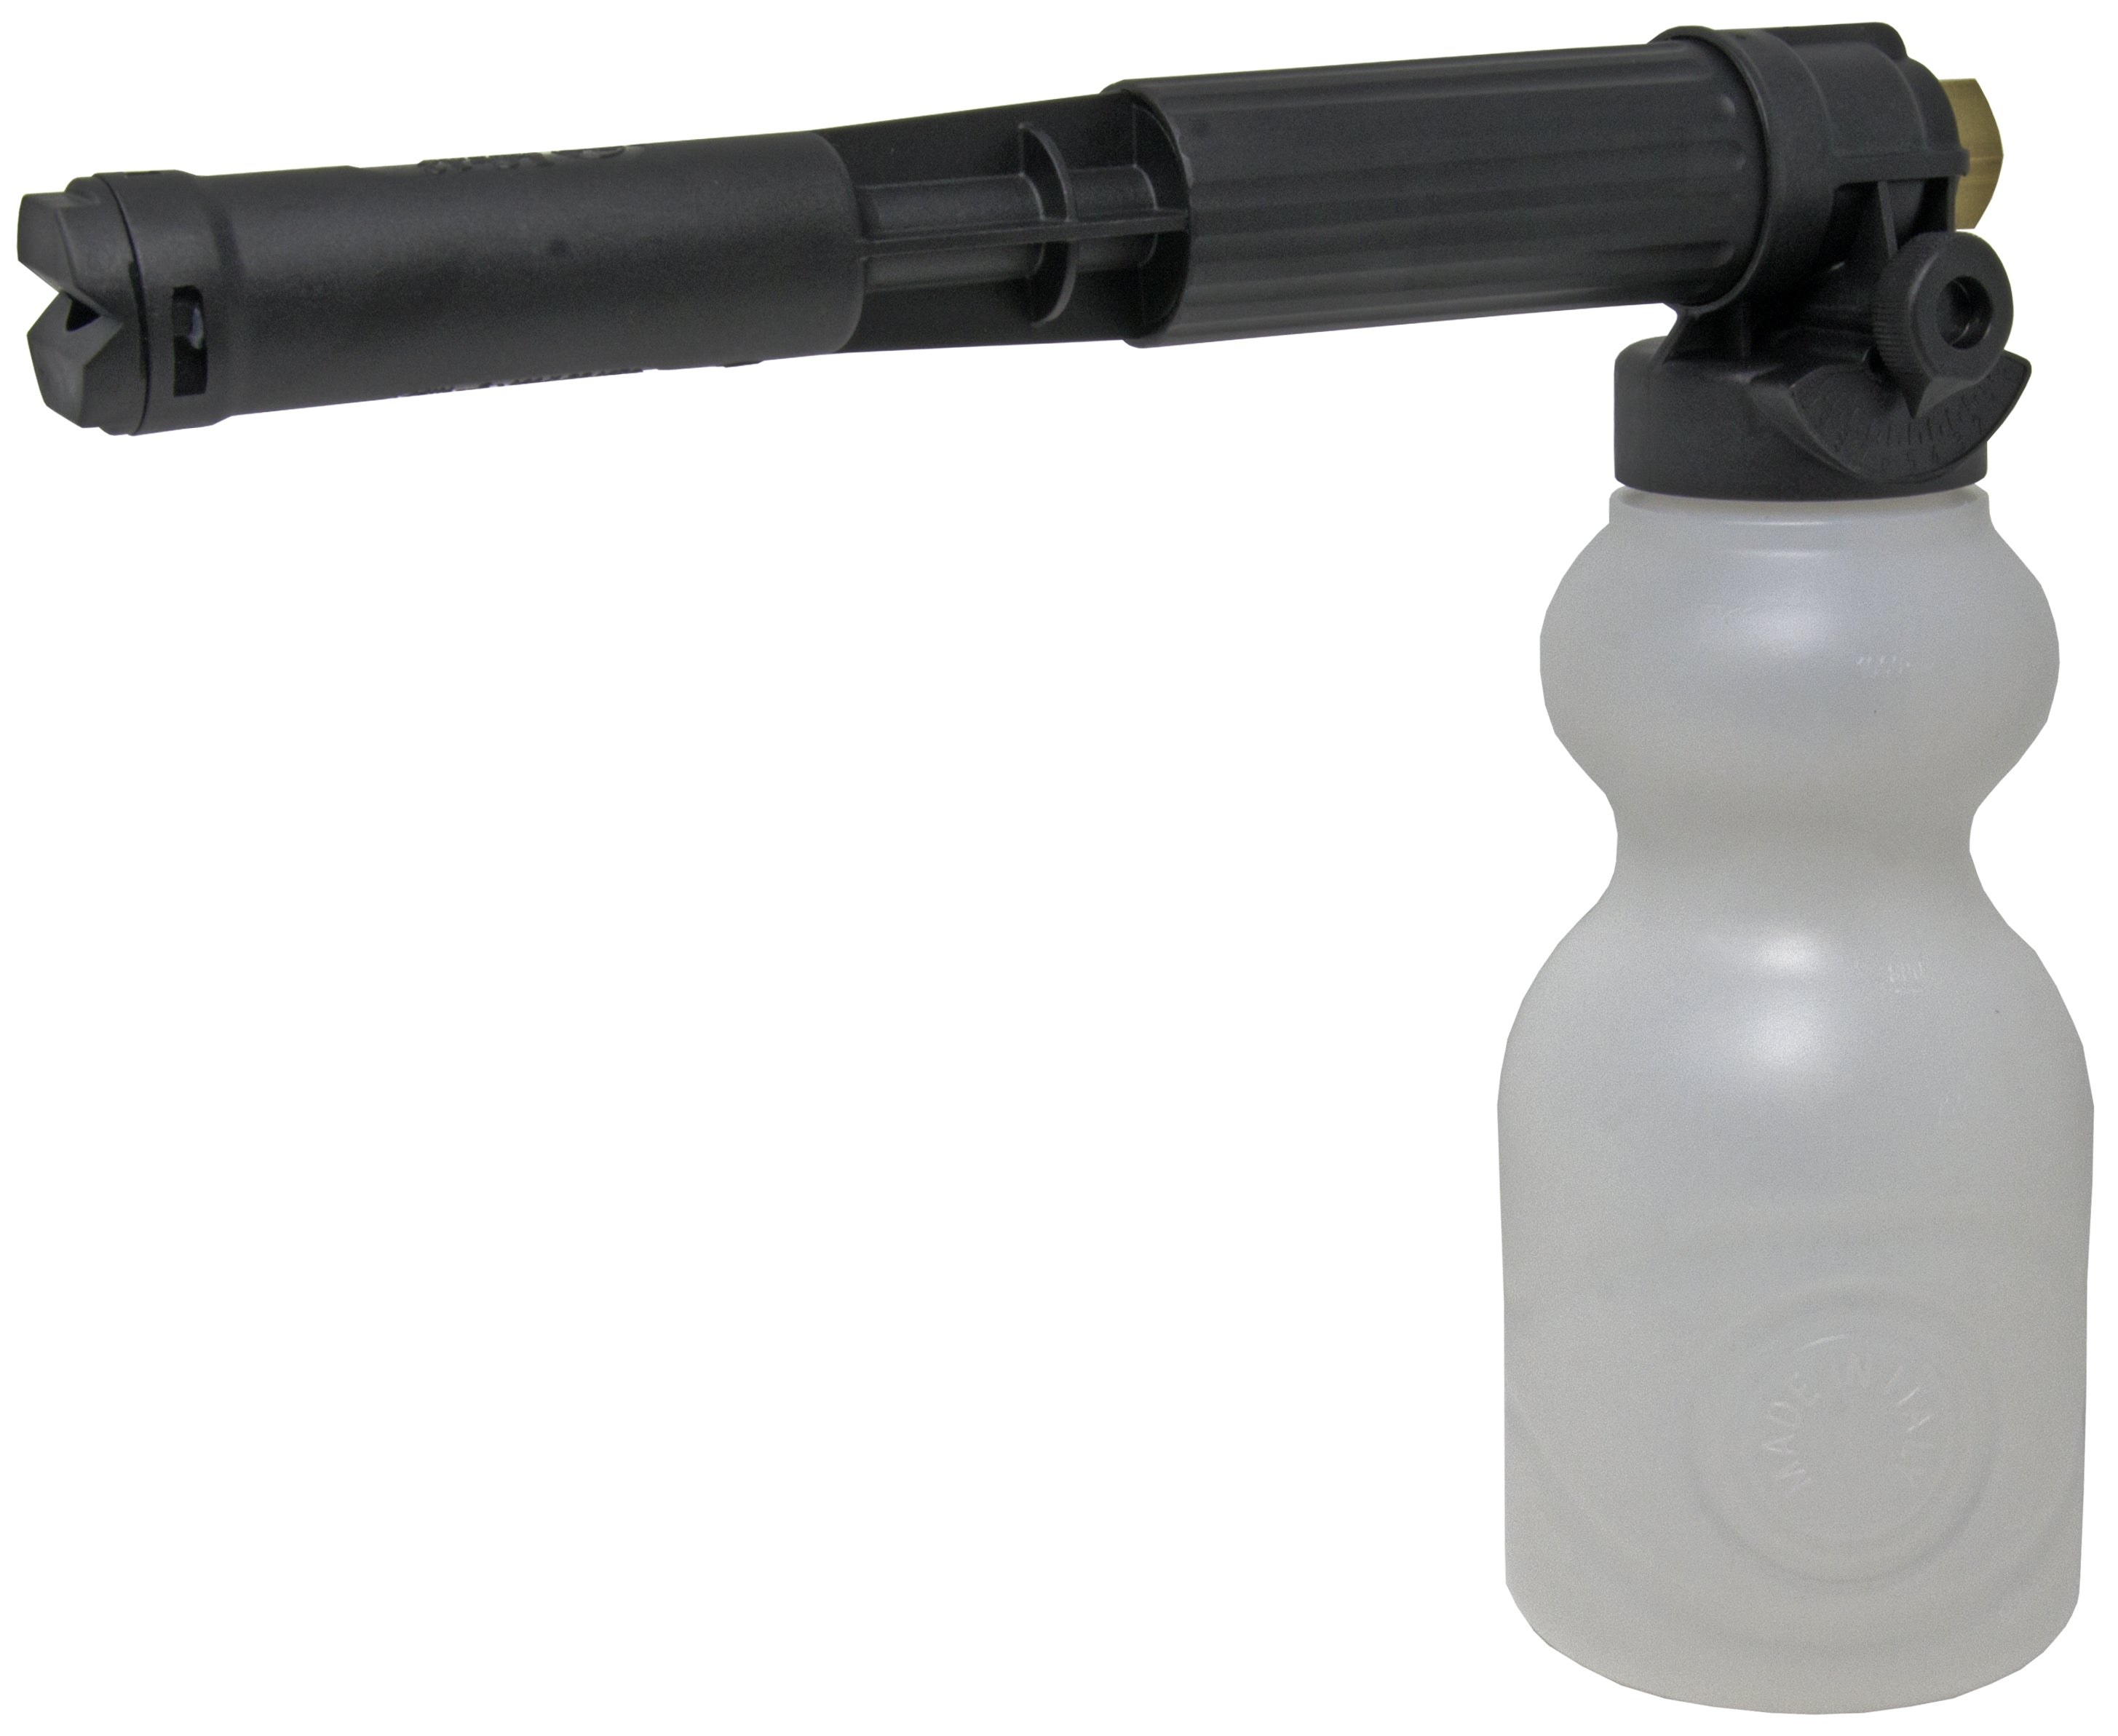 General Pump YLS12T   32 Oz. 3200 PSI @ 6.5 GPM 1/4" FPT Nozzle #5.5 Foamer With Built-In Injector